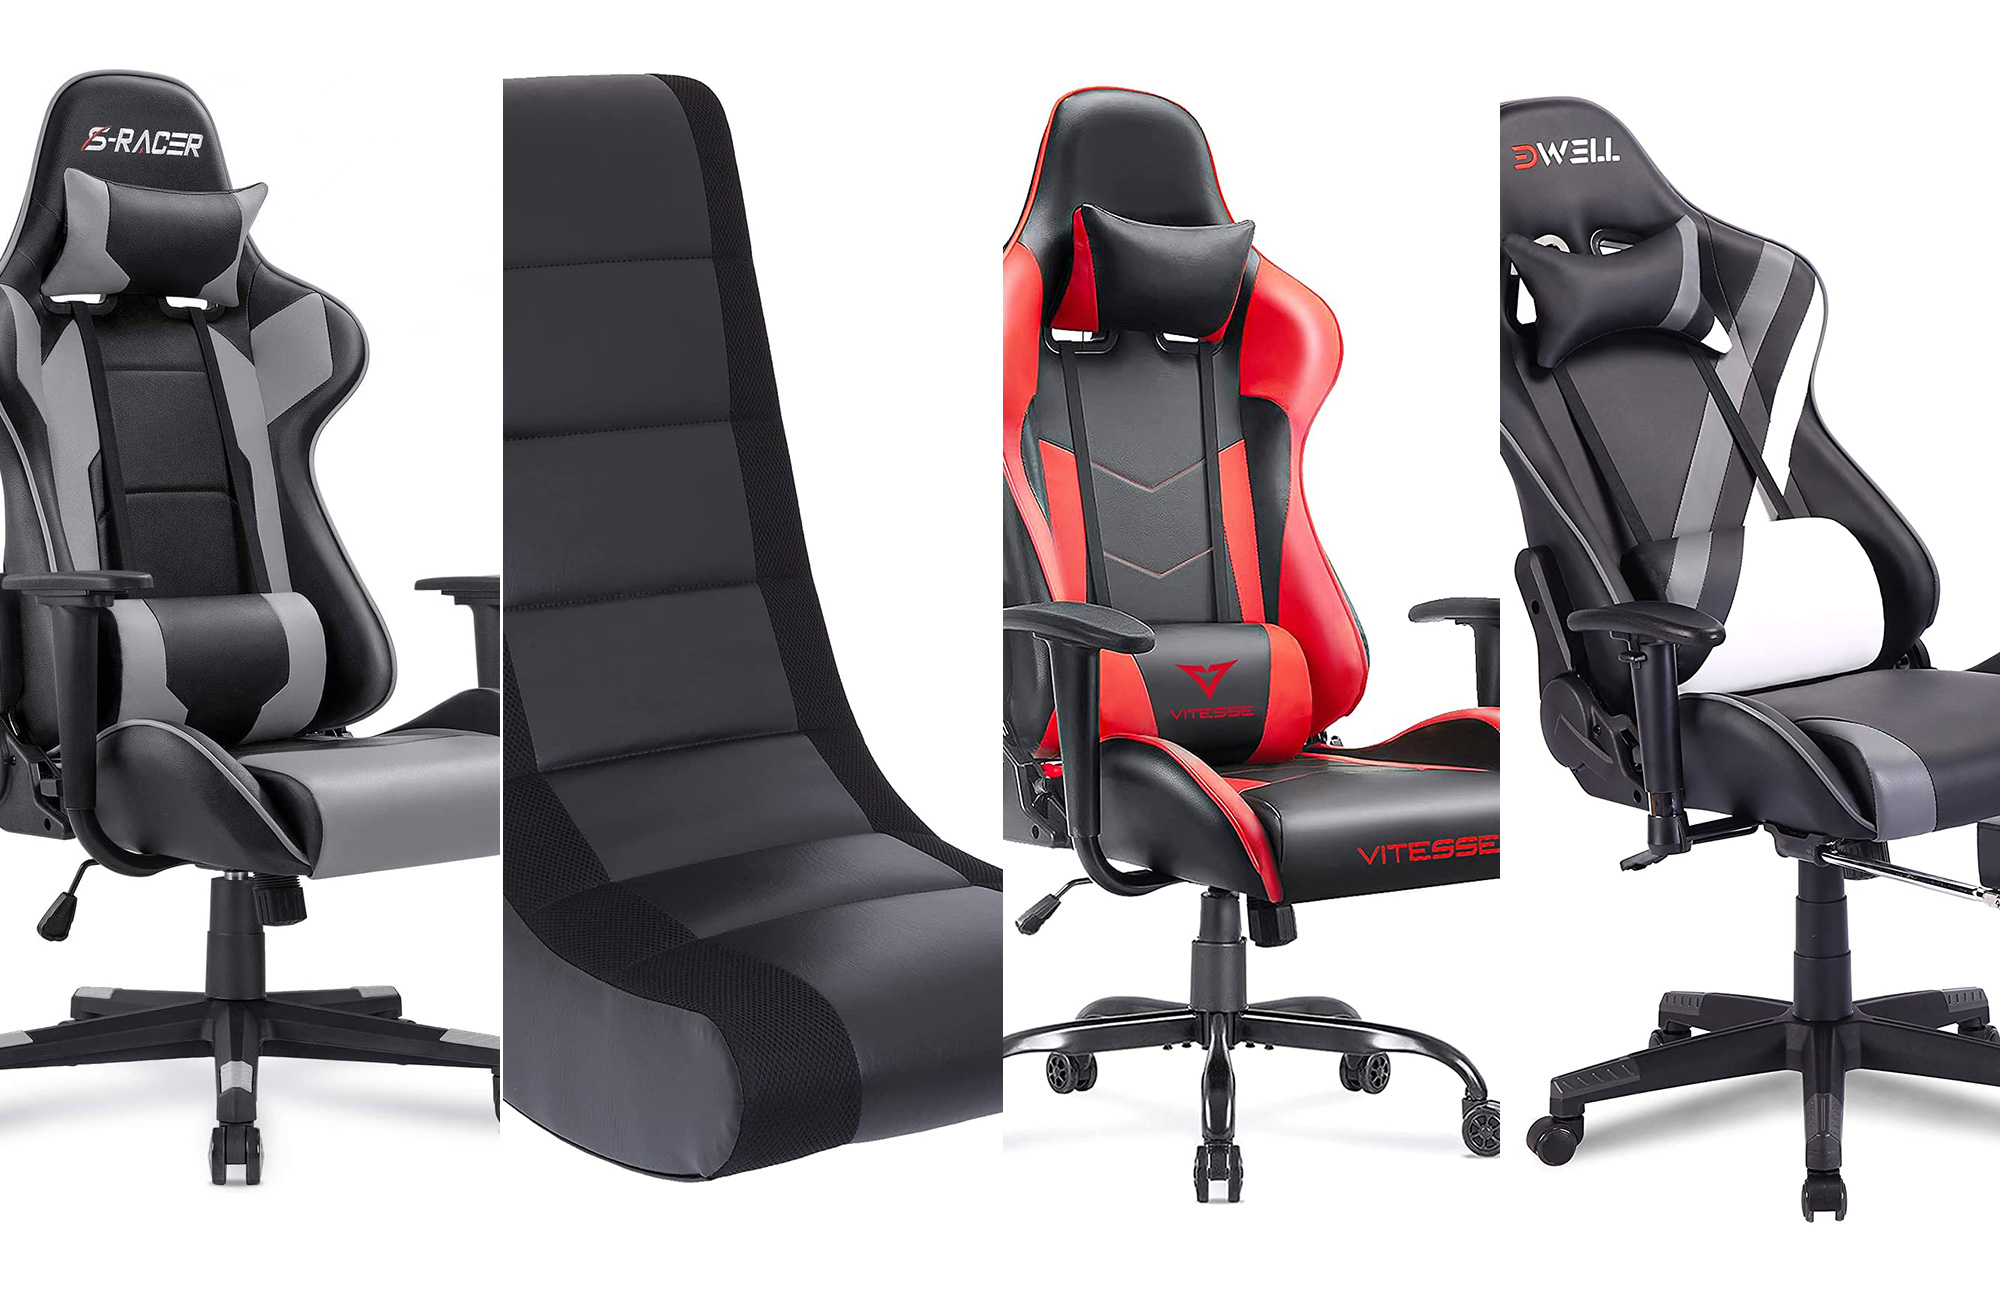 Deluxe Game Chair Black / Red - Gaming Chair - Gaming Office Chair